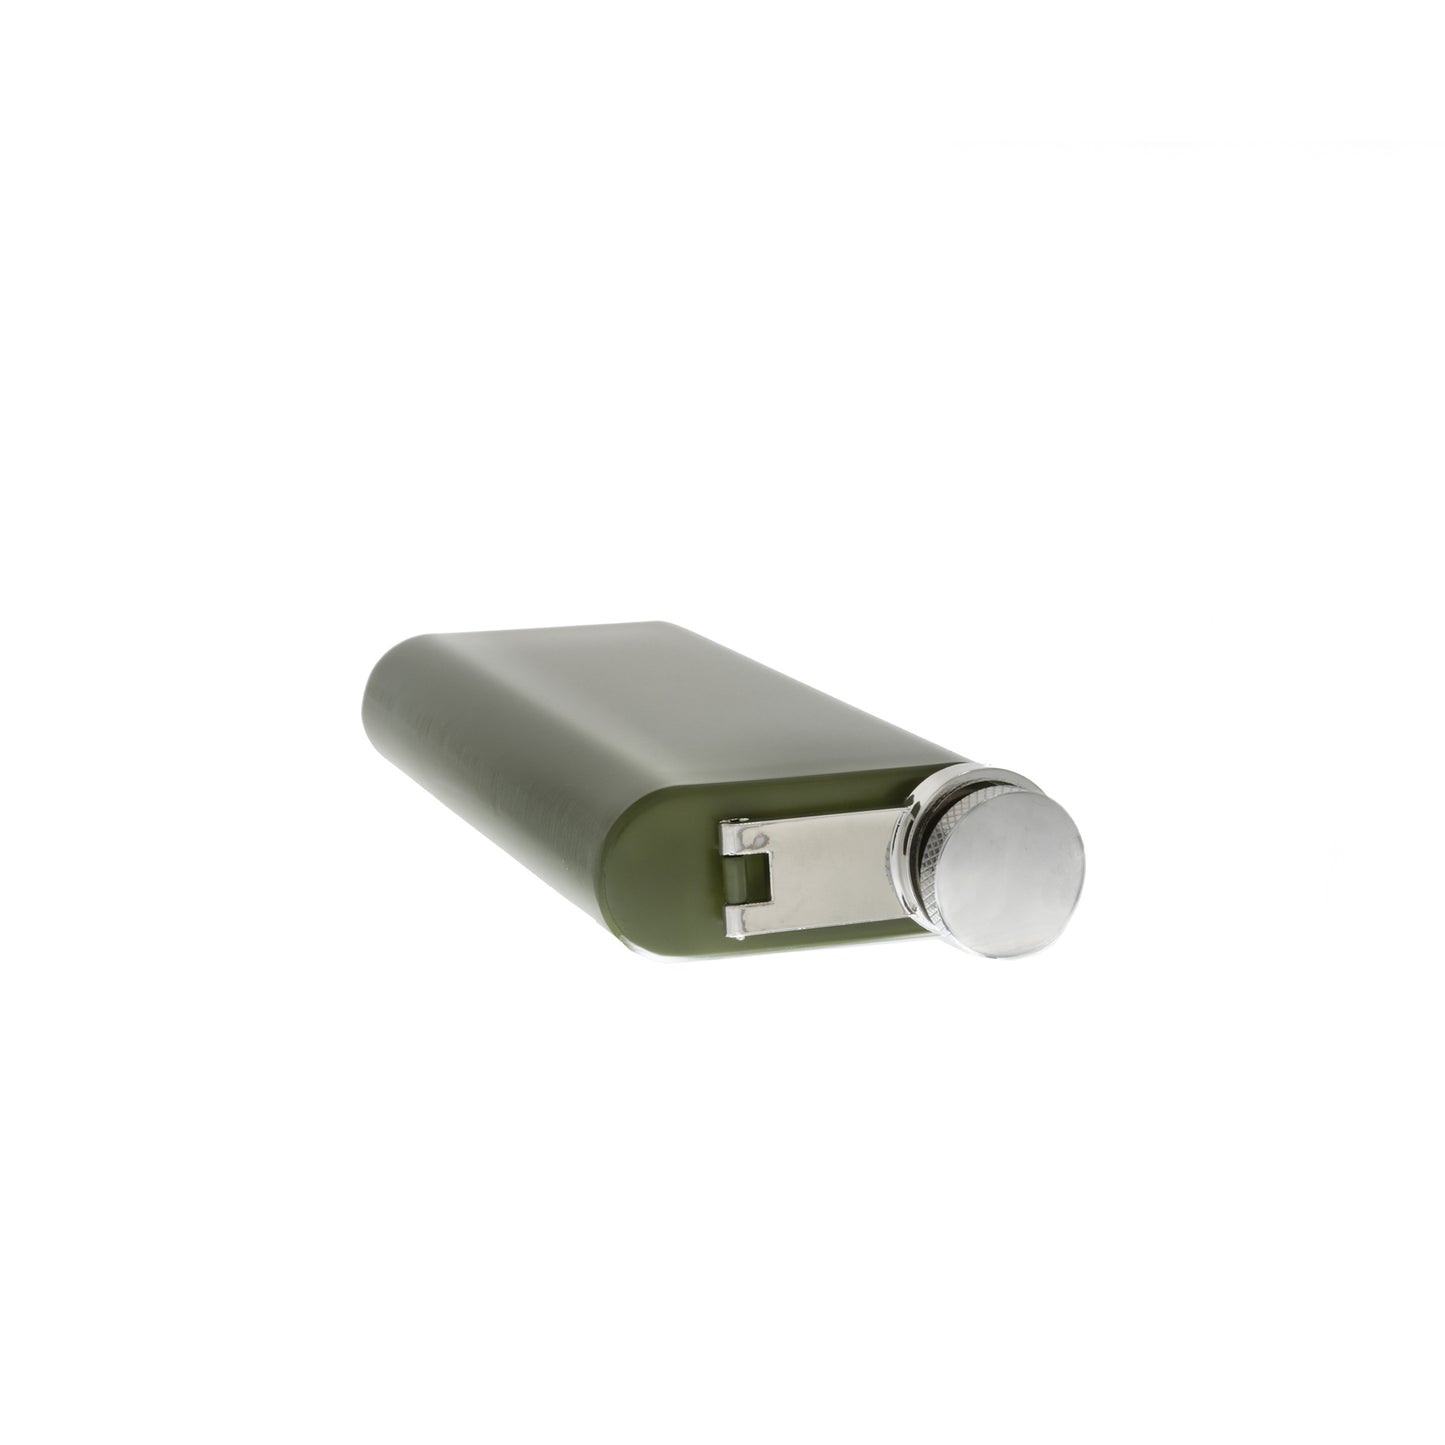 6 oz Stainless Steel Green Pocket Flask